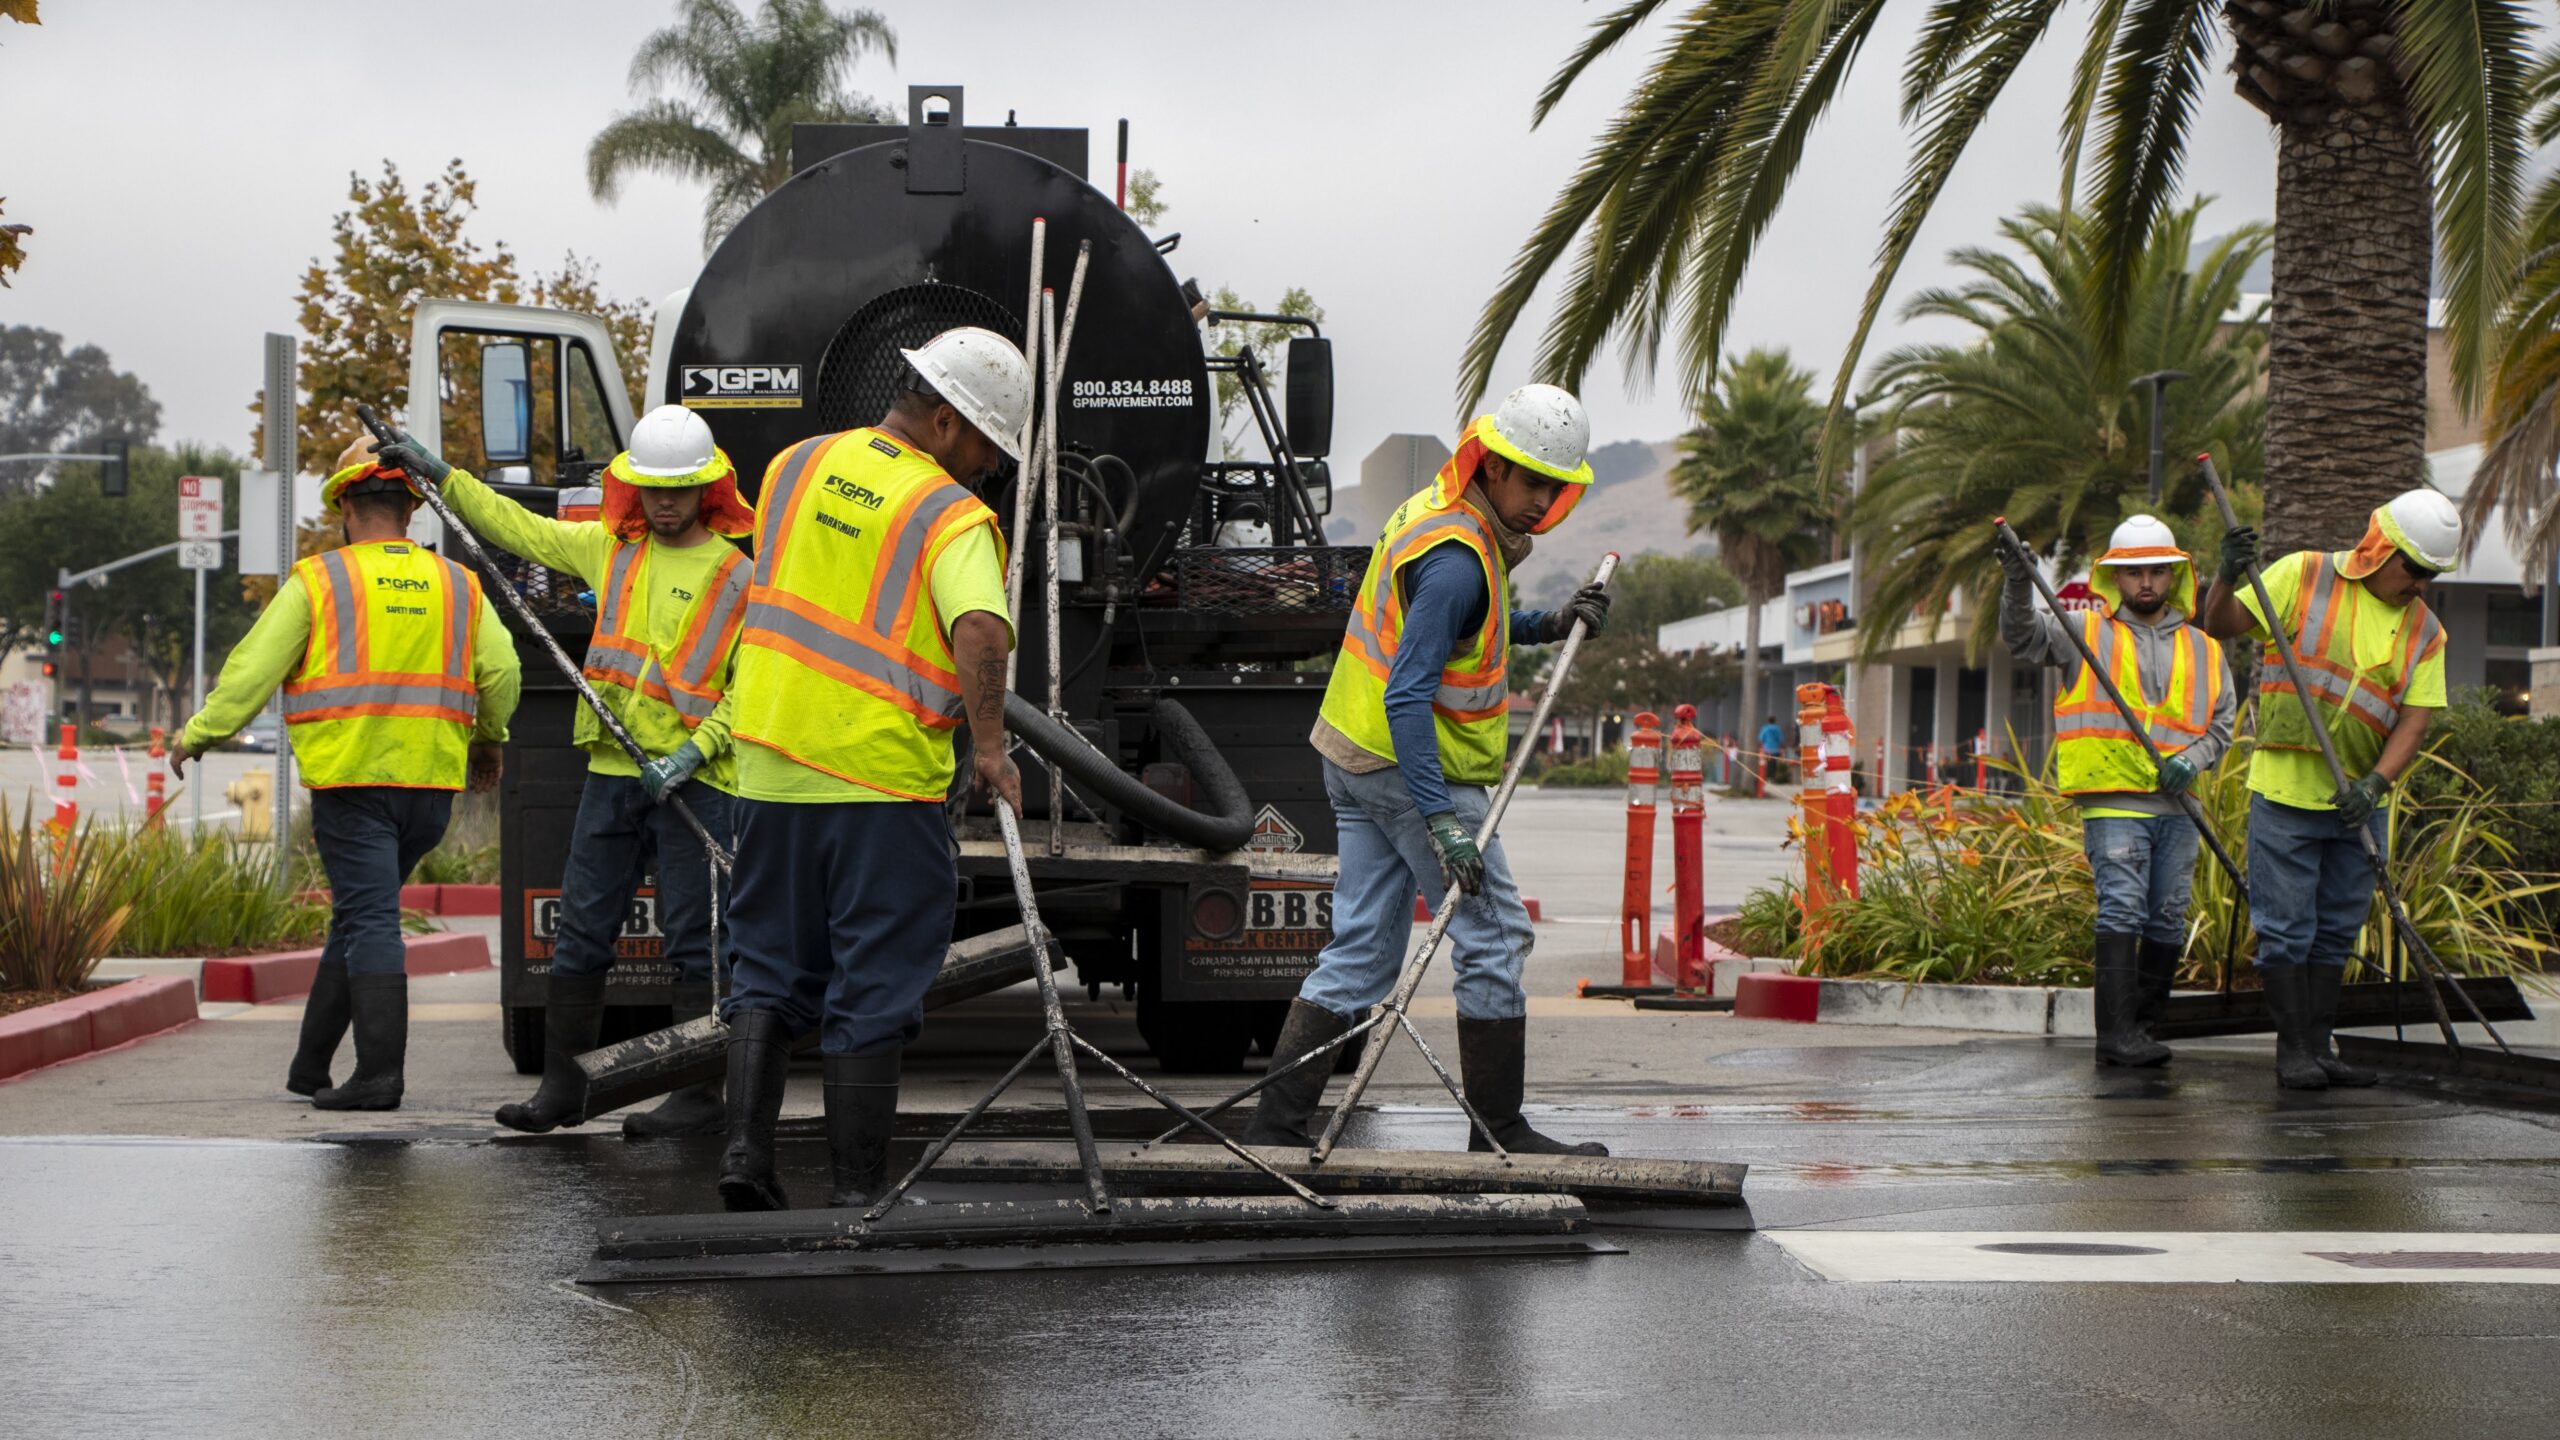 The crew of the top commercial paving company in Santa Ynez, California, working on an asphalt installation project.